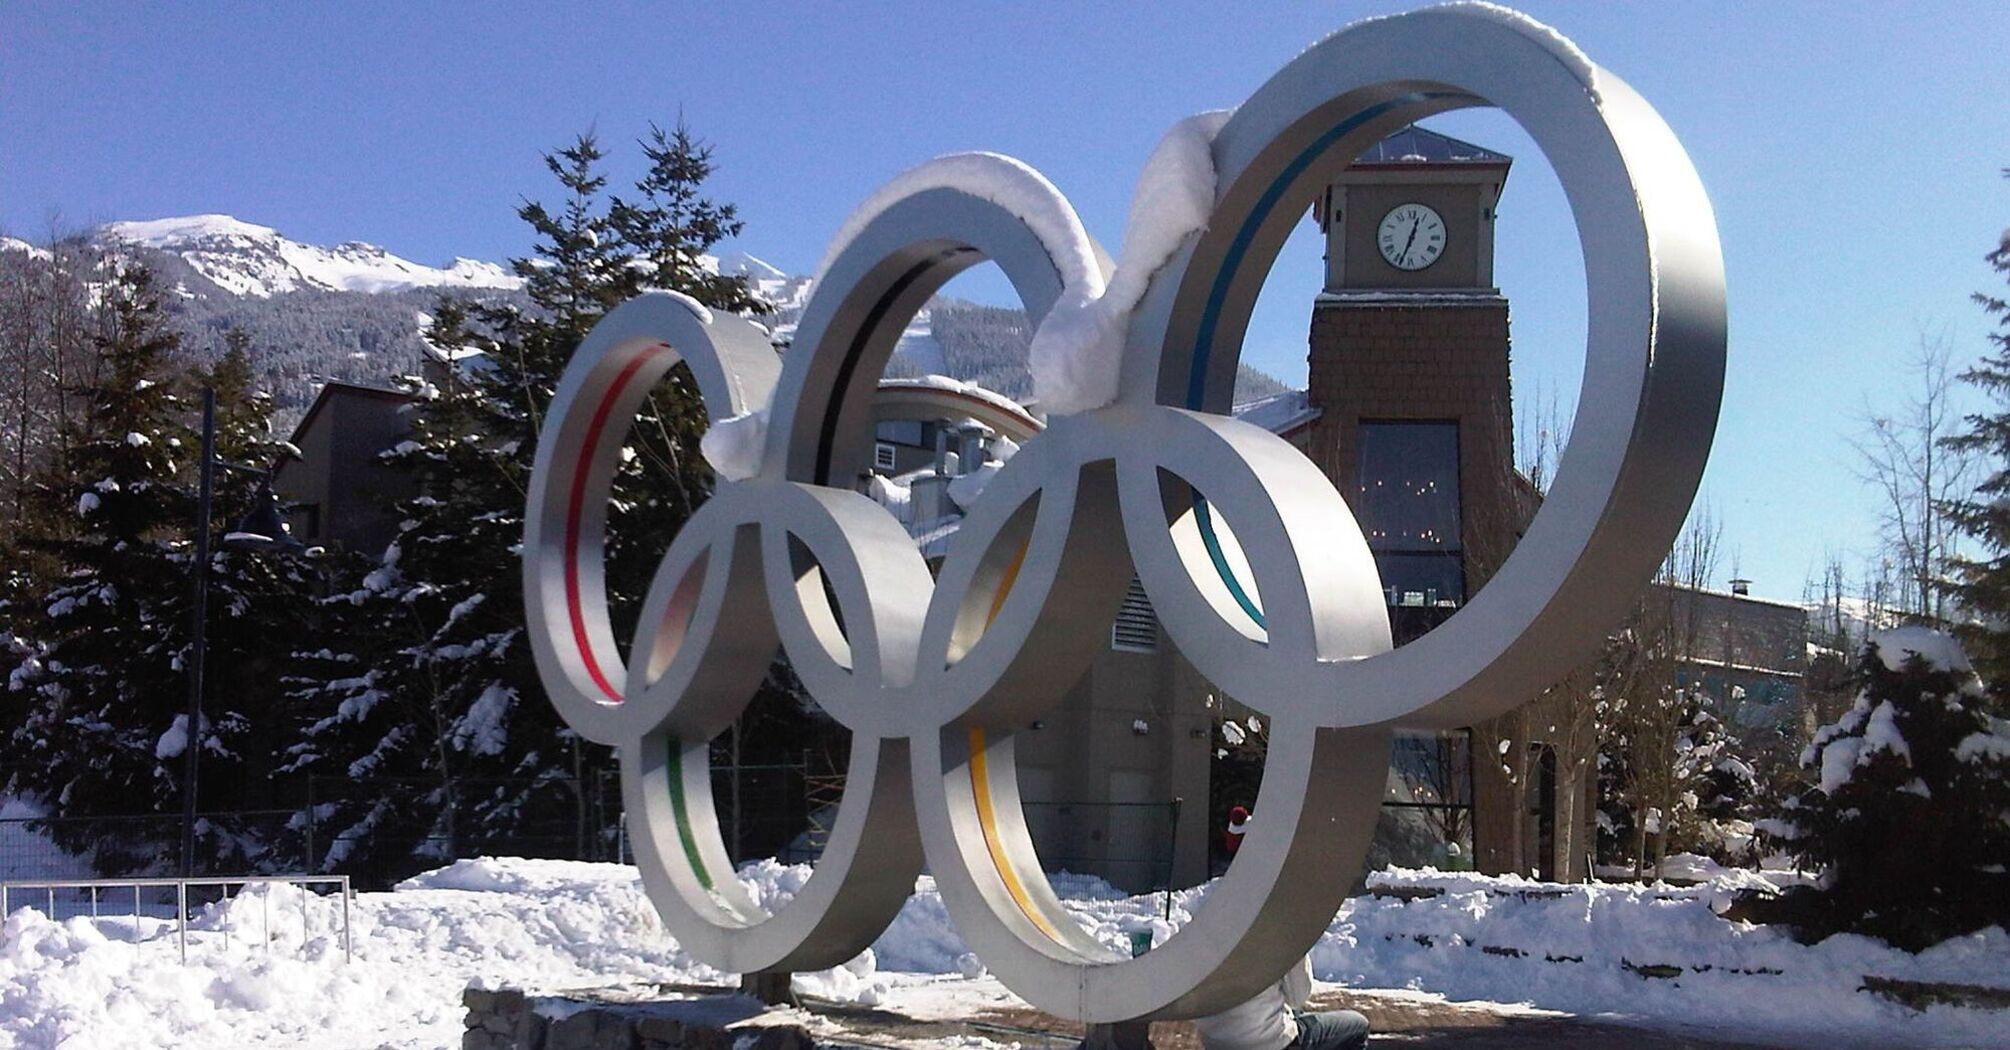 Olympic rings monument on a sunny snowy square with trees in the background